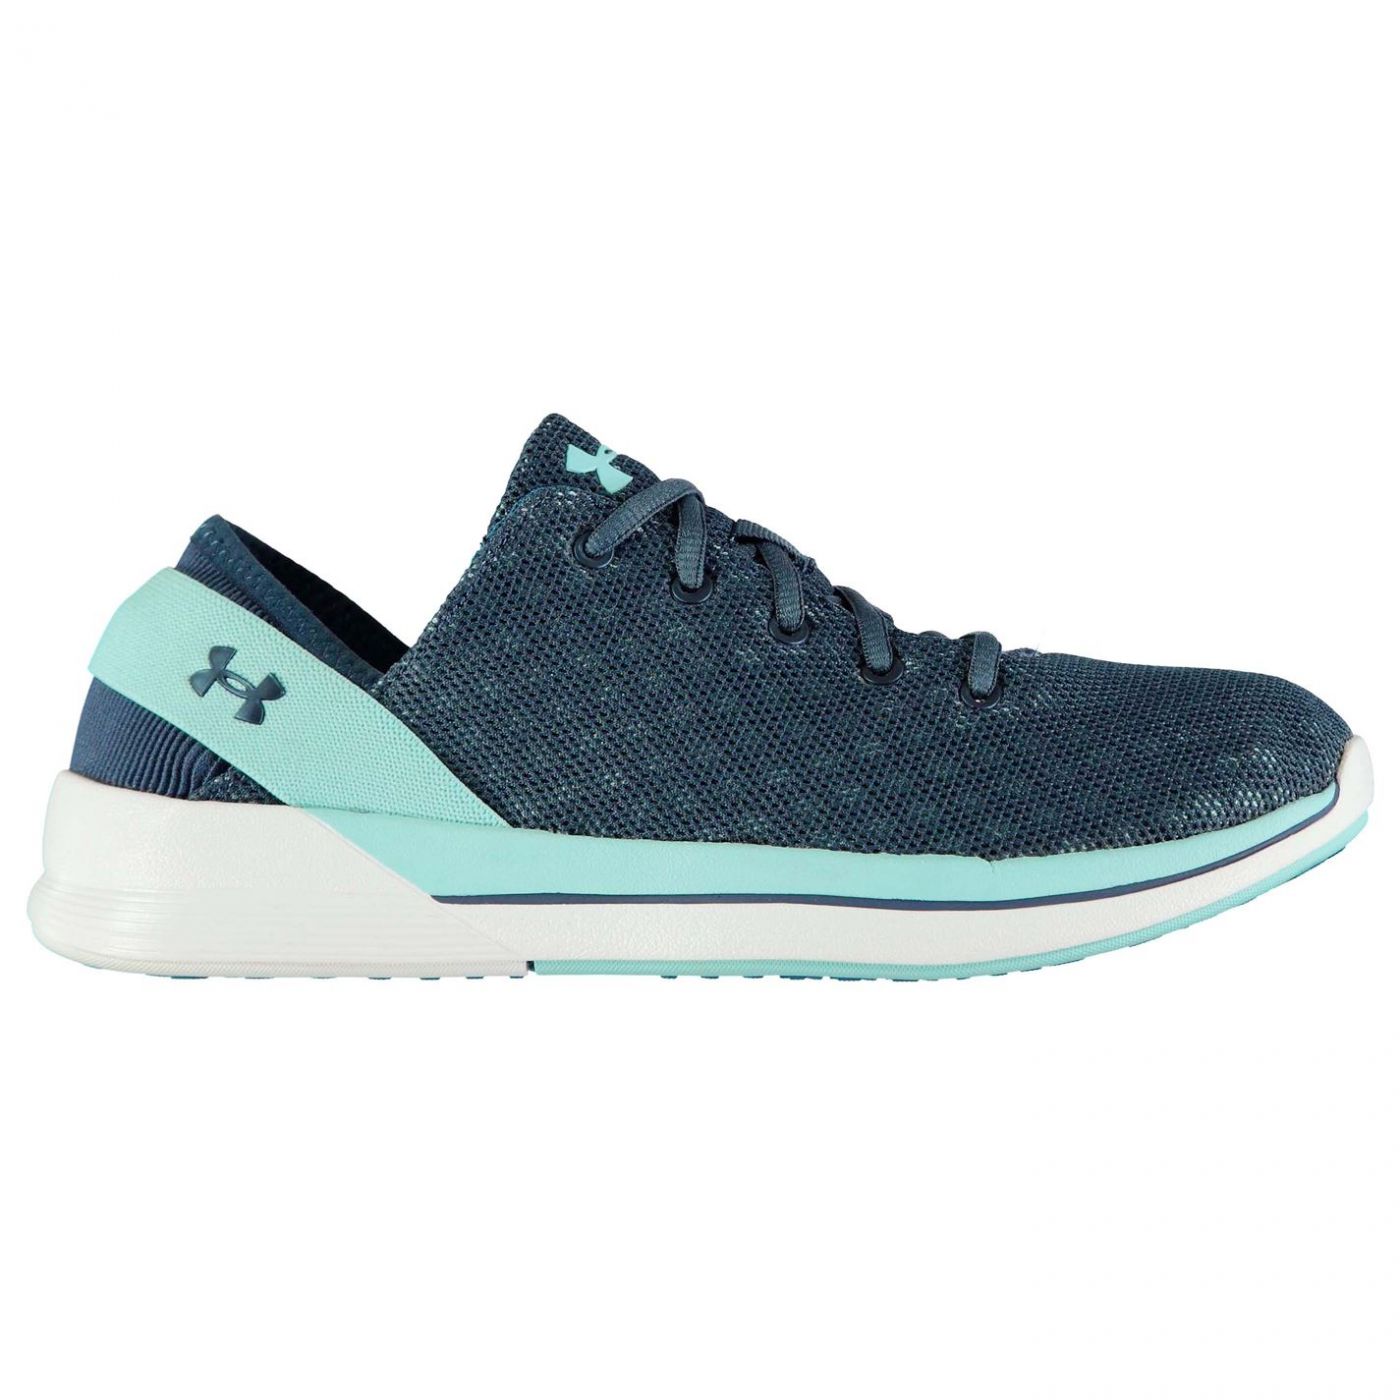 Under Armour Rotation Training Shoes Ladies